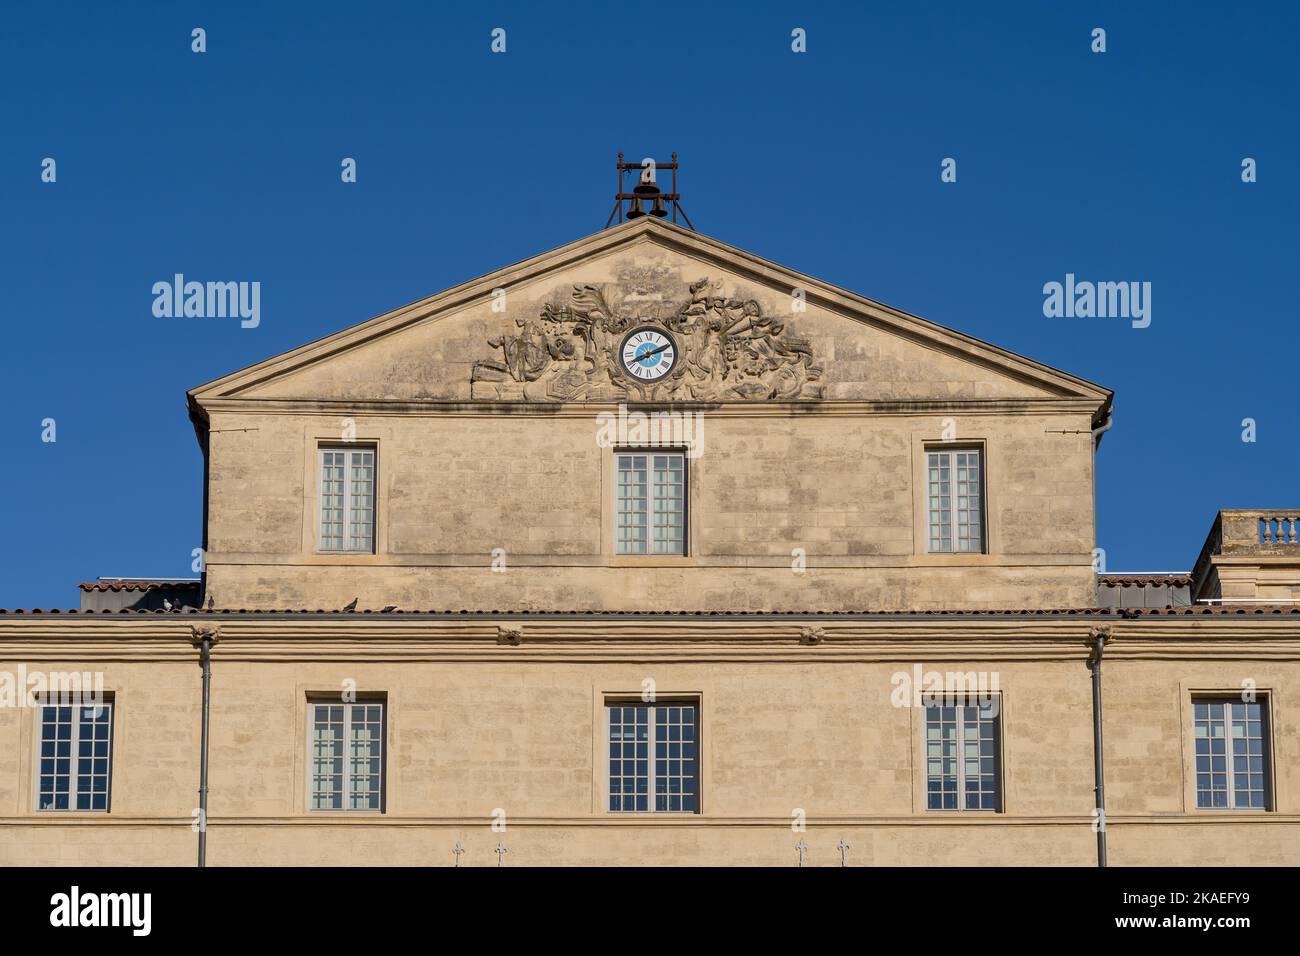 Detail view of the ancient stone facade of Hotel de Massilian, an historic building home of the Musee Fabre, a famous landmark of Montpellier, France Stock Photo